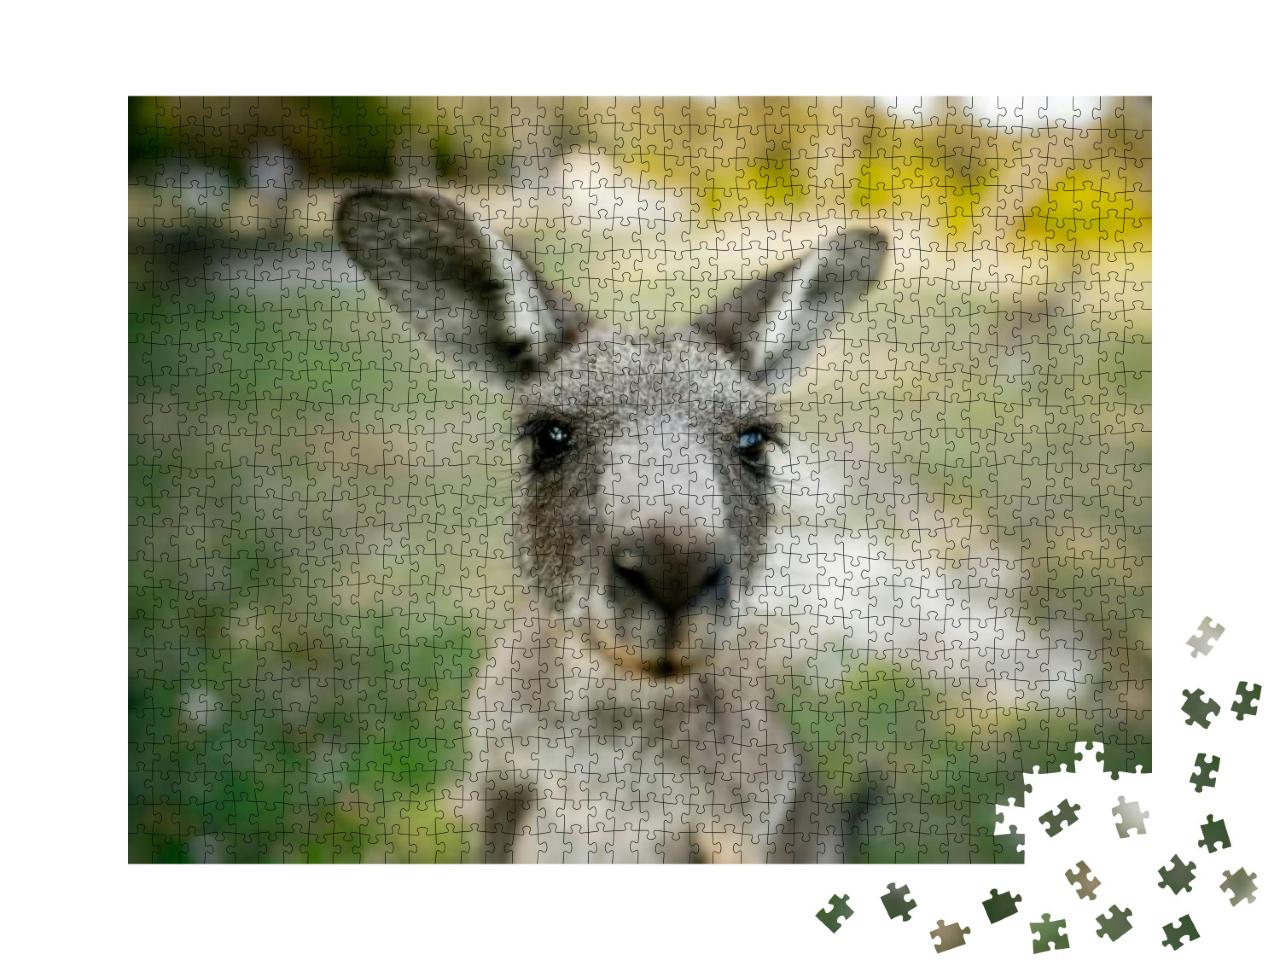 Close Up of a Kangaroo Looking Directly At the Camera... Jigsaw Puzzle with 1000 pieces